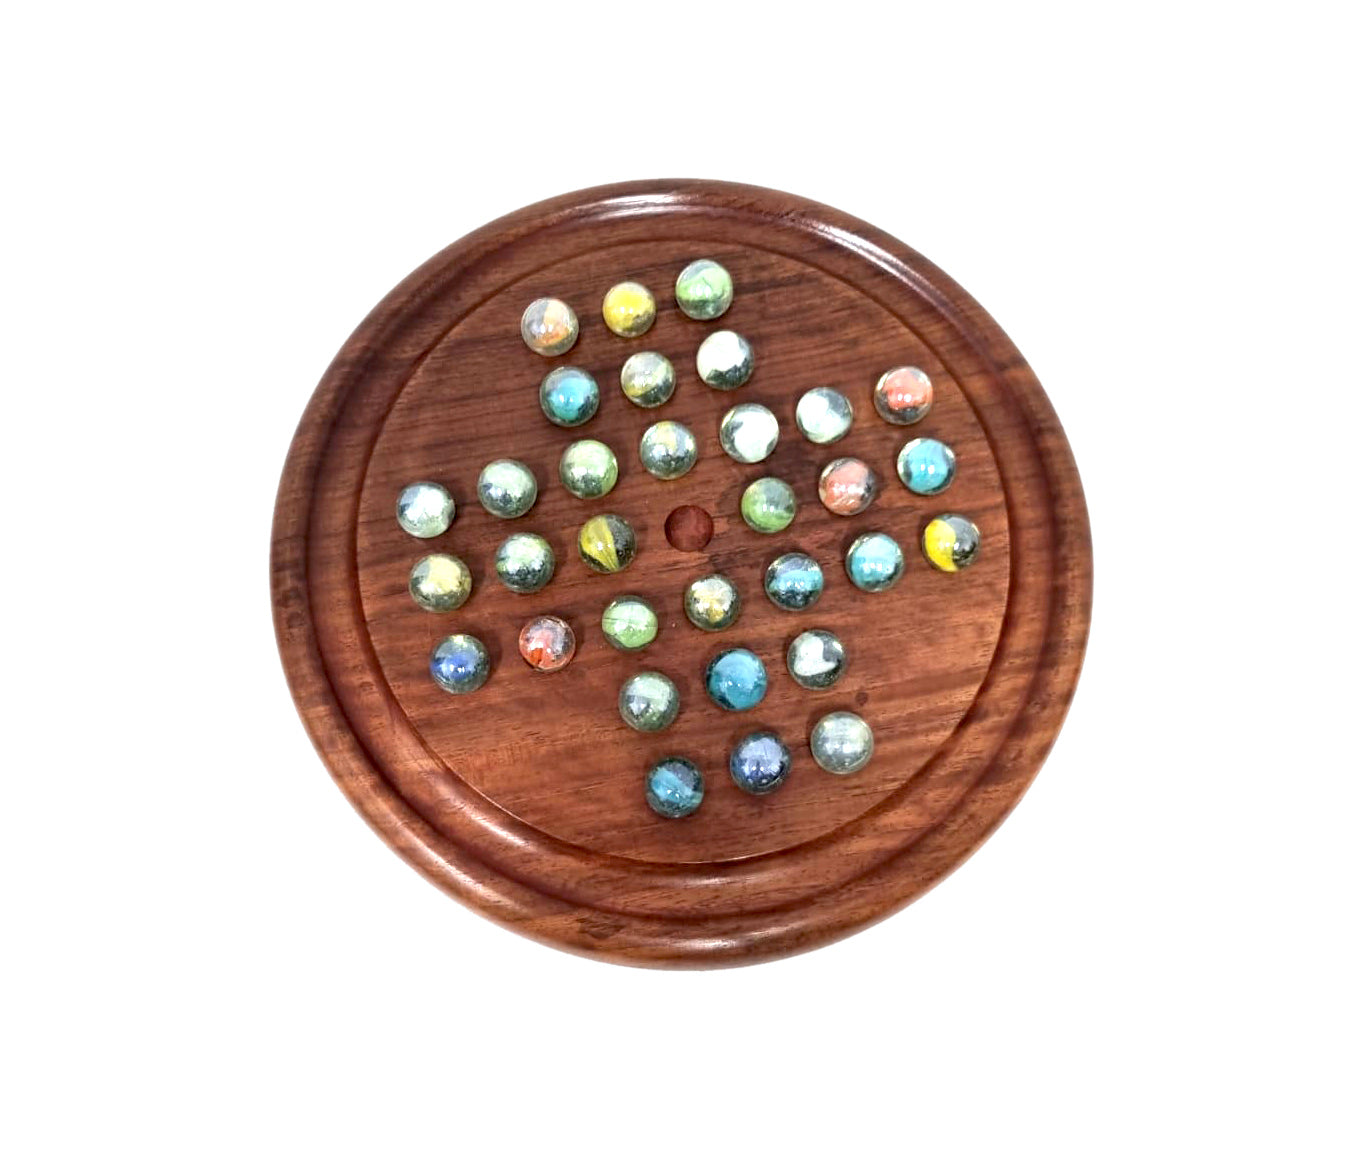 Wooden Solitaire Game with Marble balls